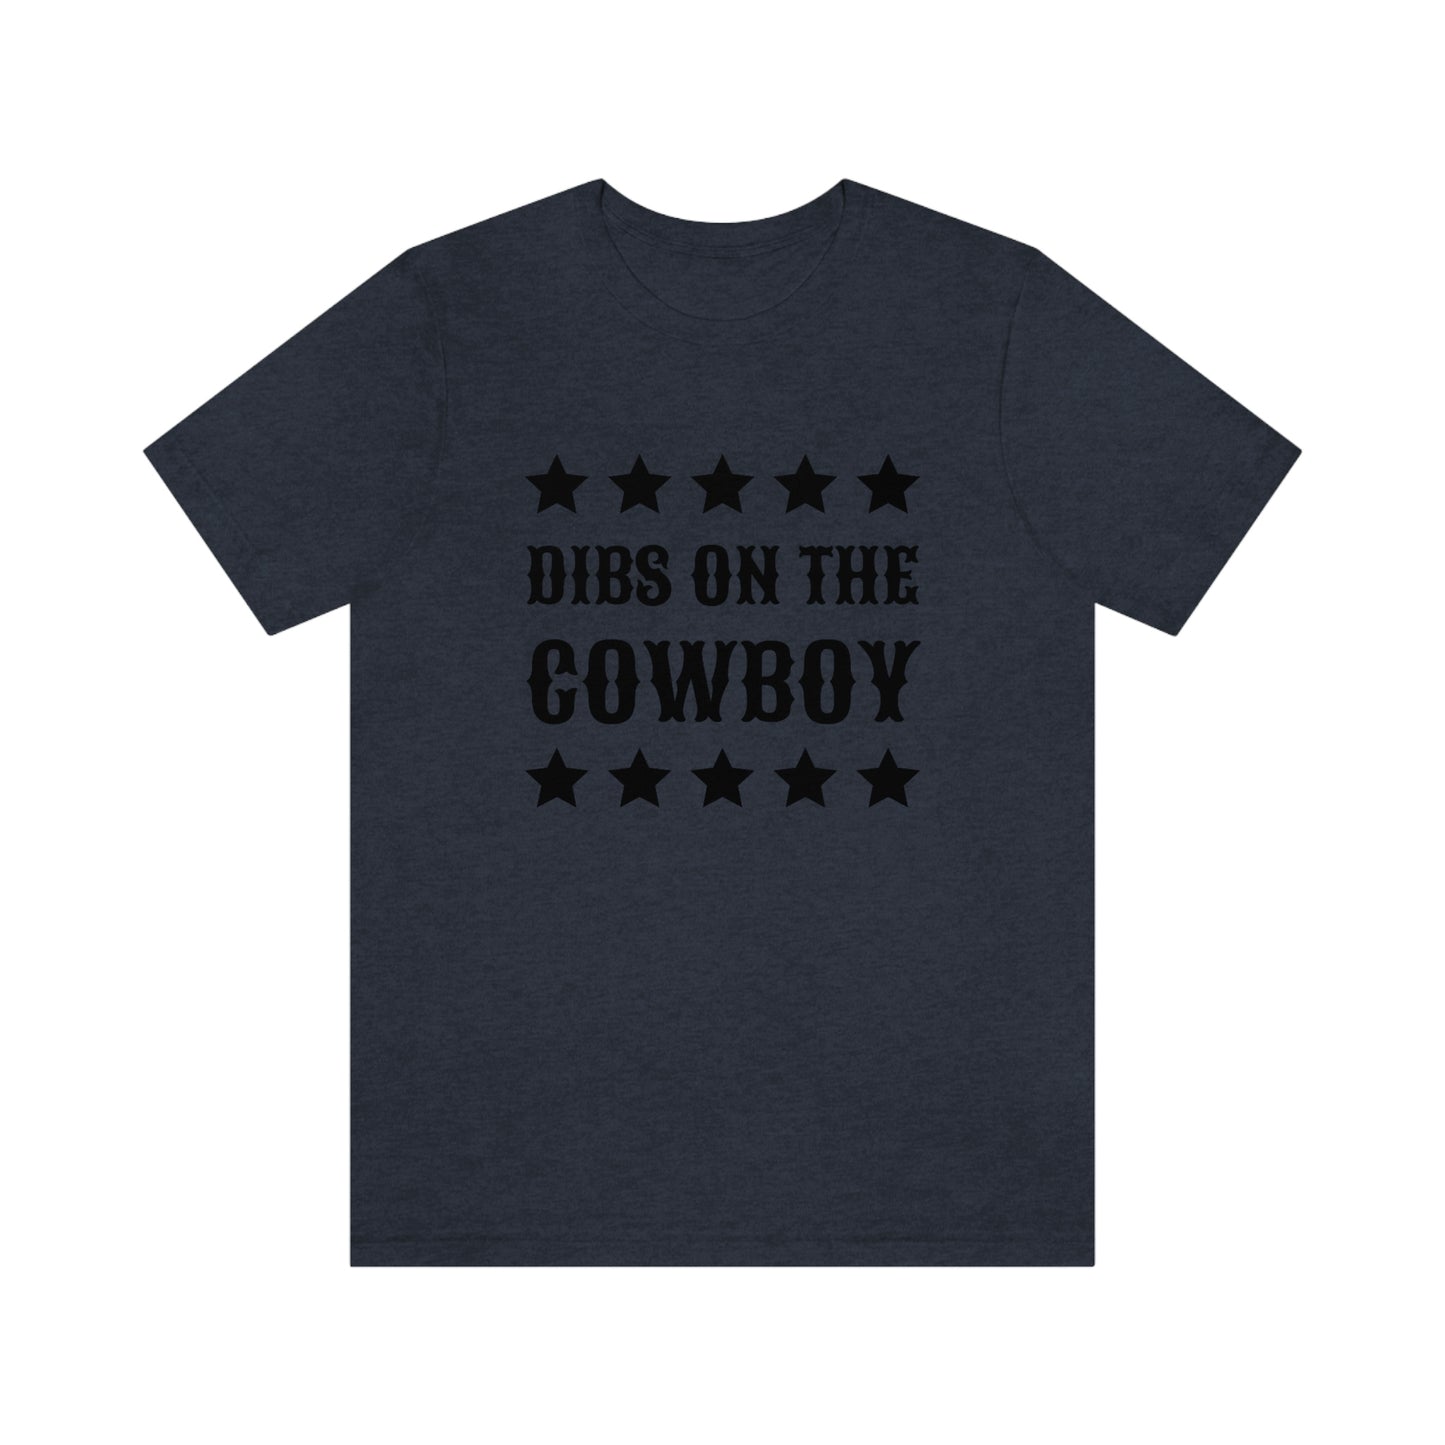 "Dibs on the Cowboy" Unisex Jersey Short Sleeve Tee